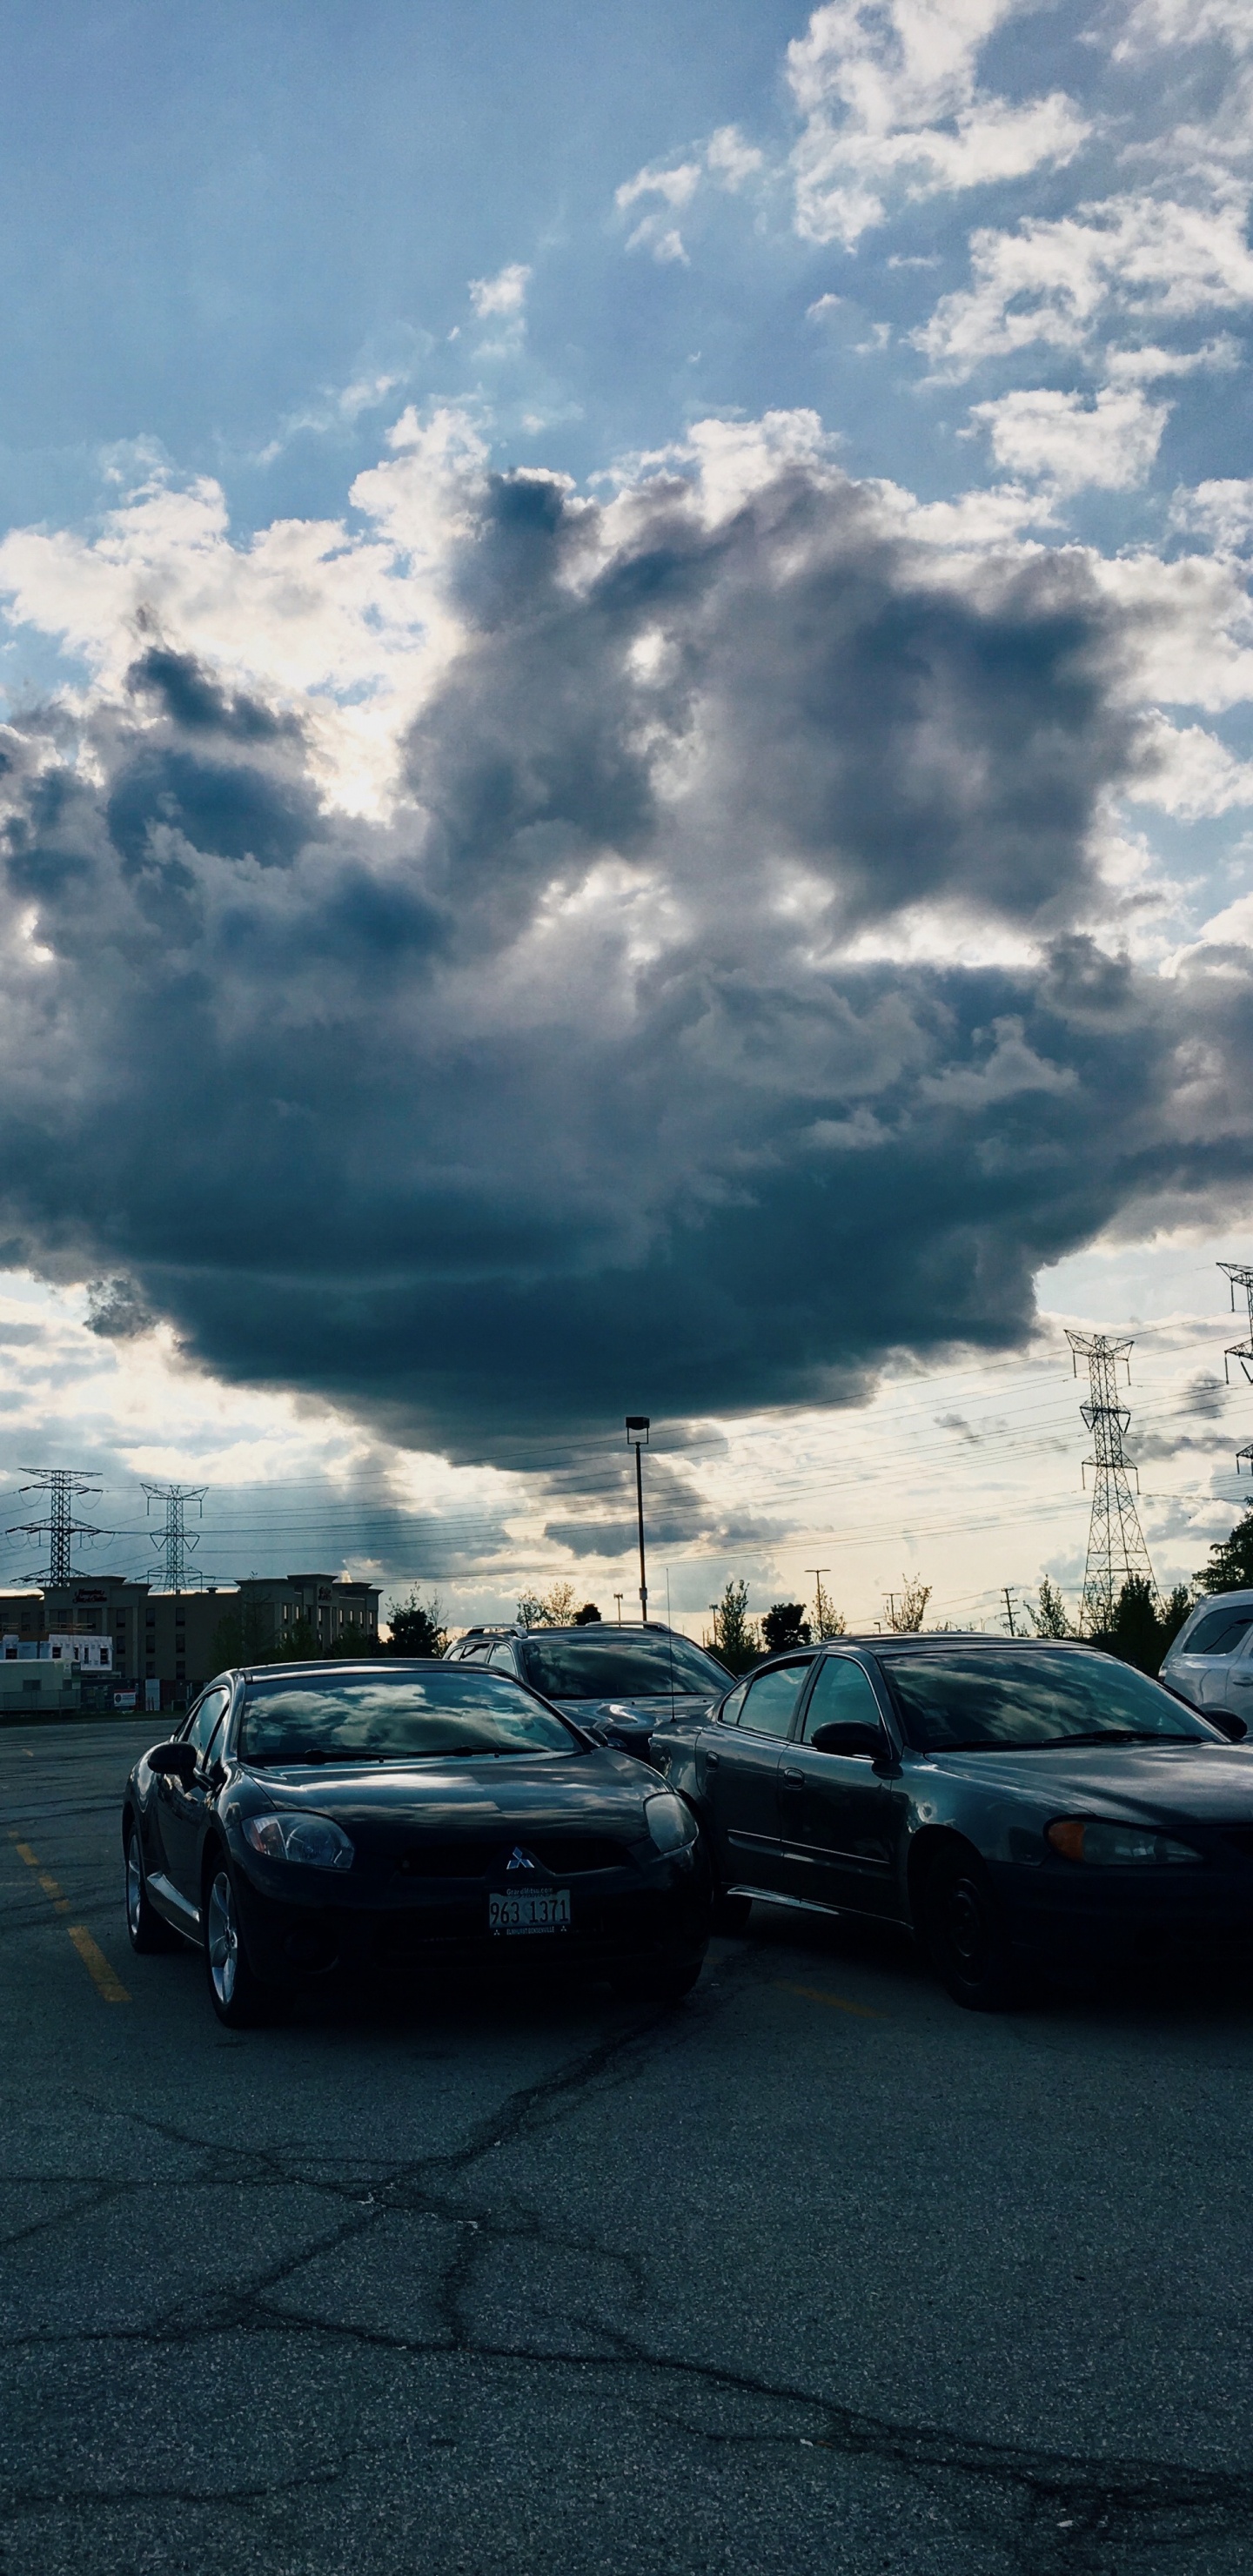 Cars on Road Under Cloudy Sky During Daytime. Wallpaper in 1440x2960 Resolution